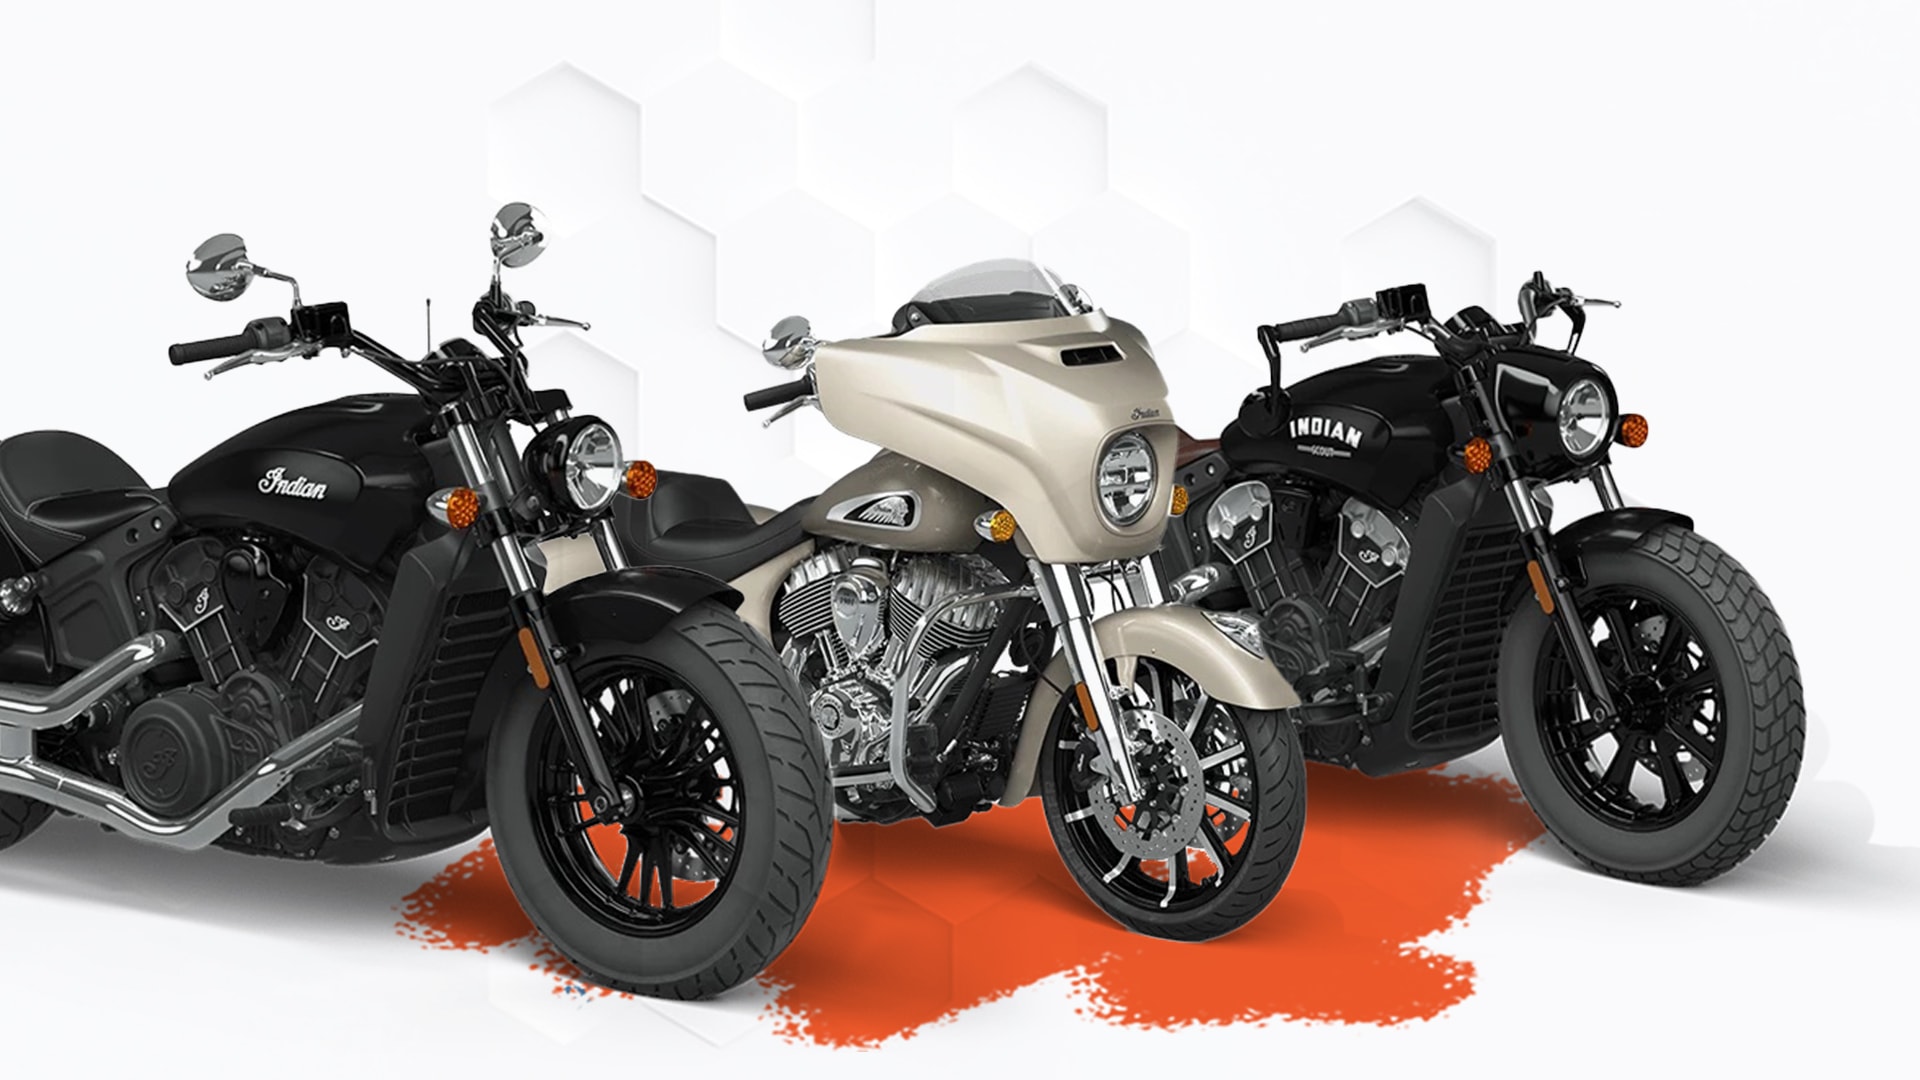 The 2022 Indian Motorcycle Lineup + Our Take On Each Model / wBW